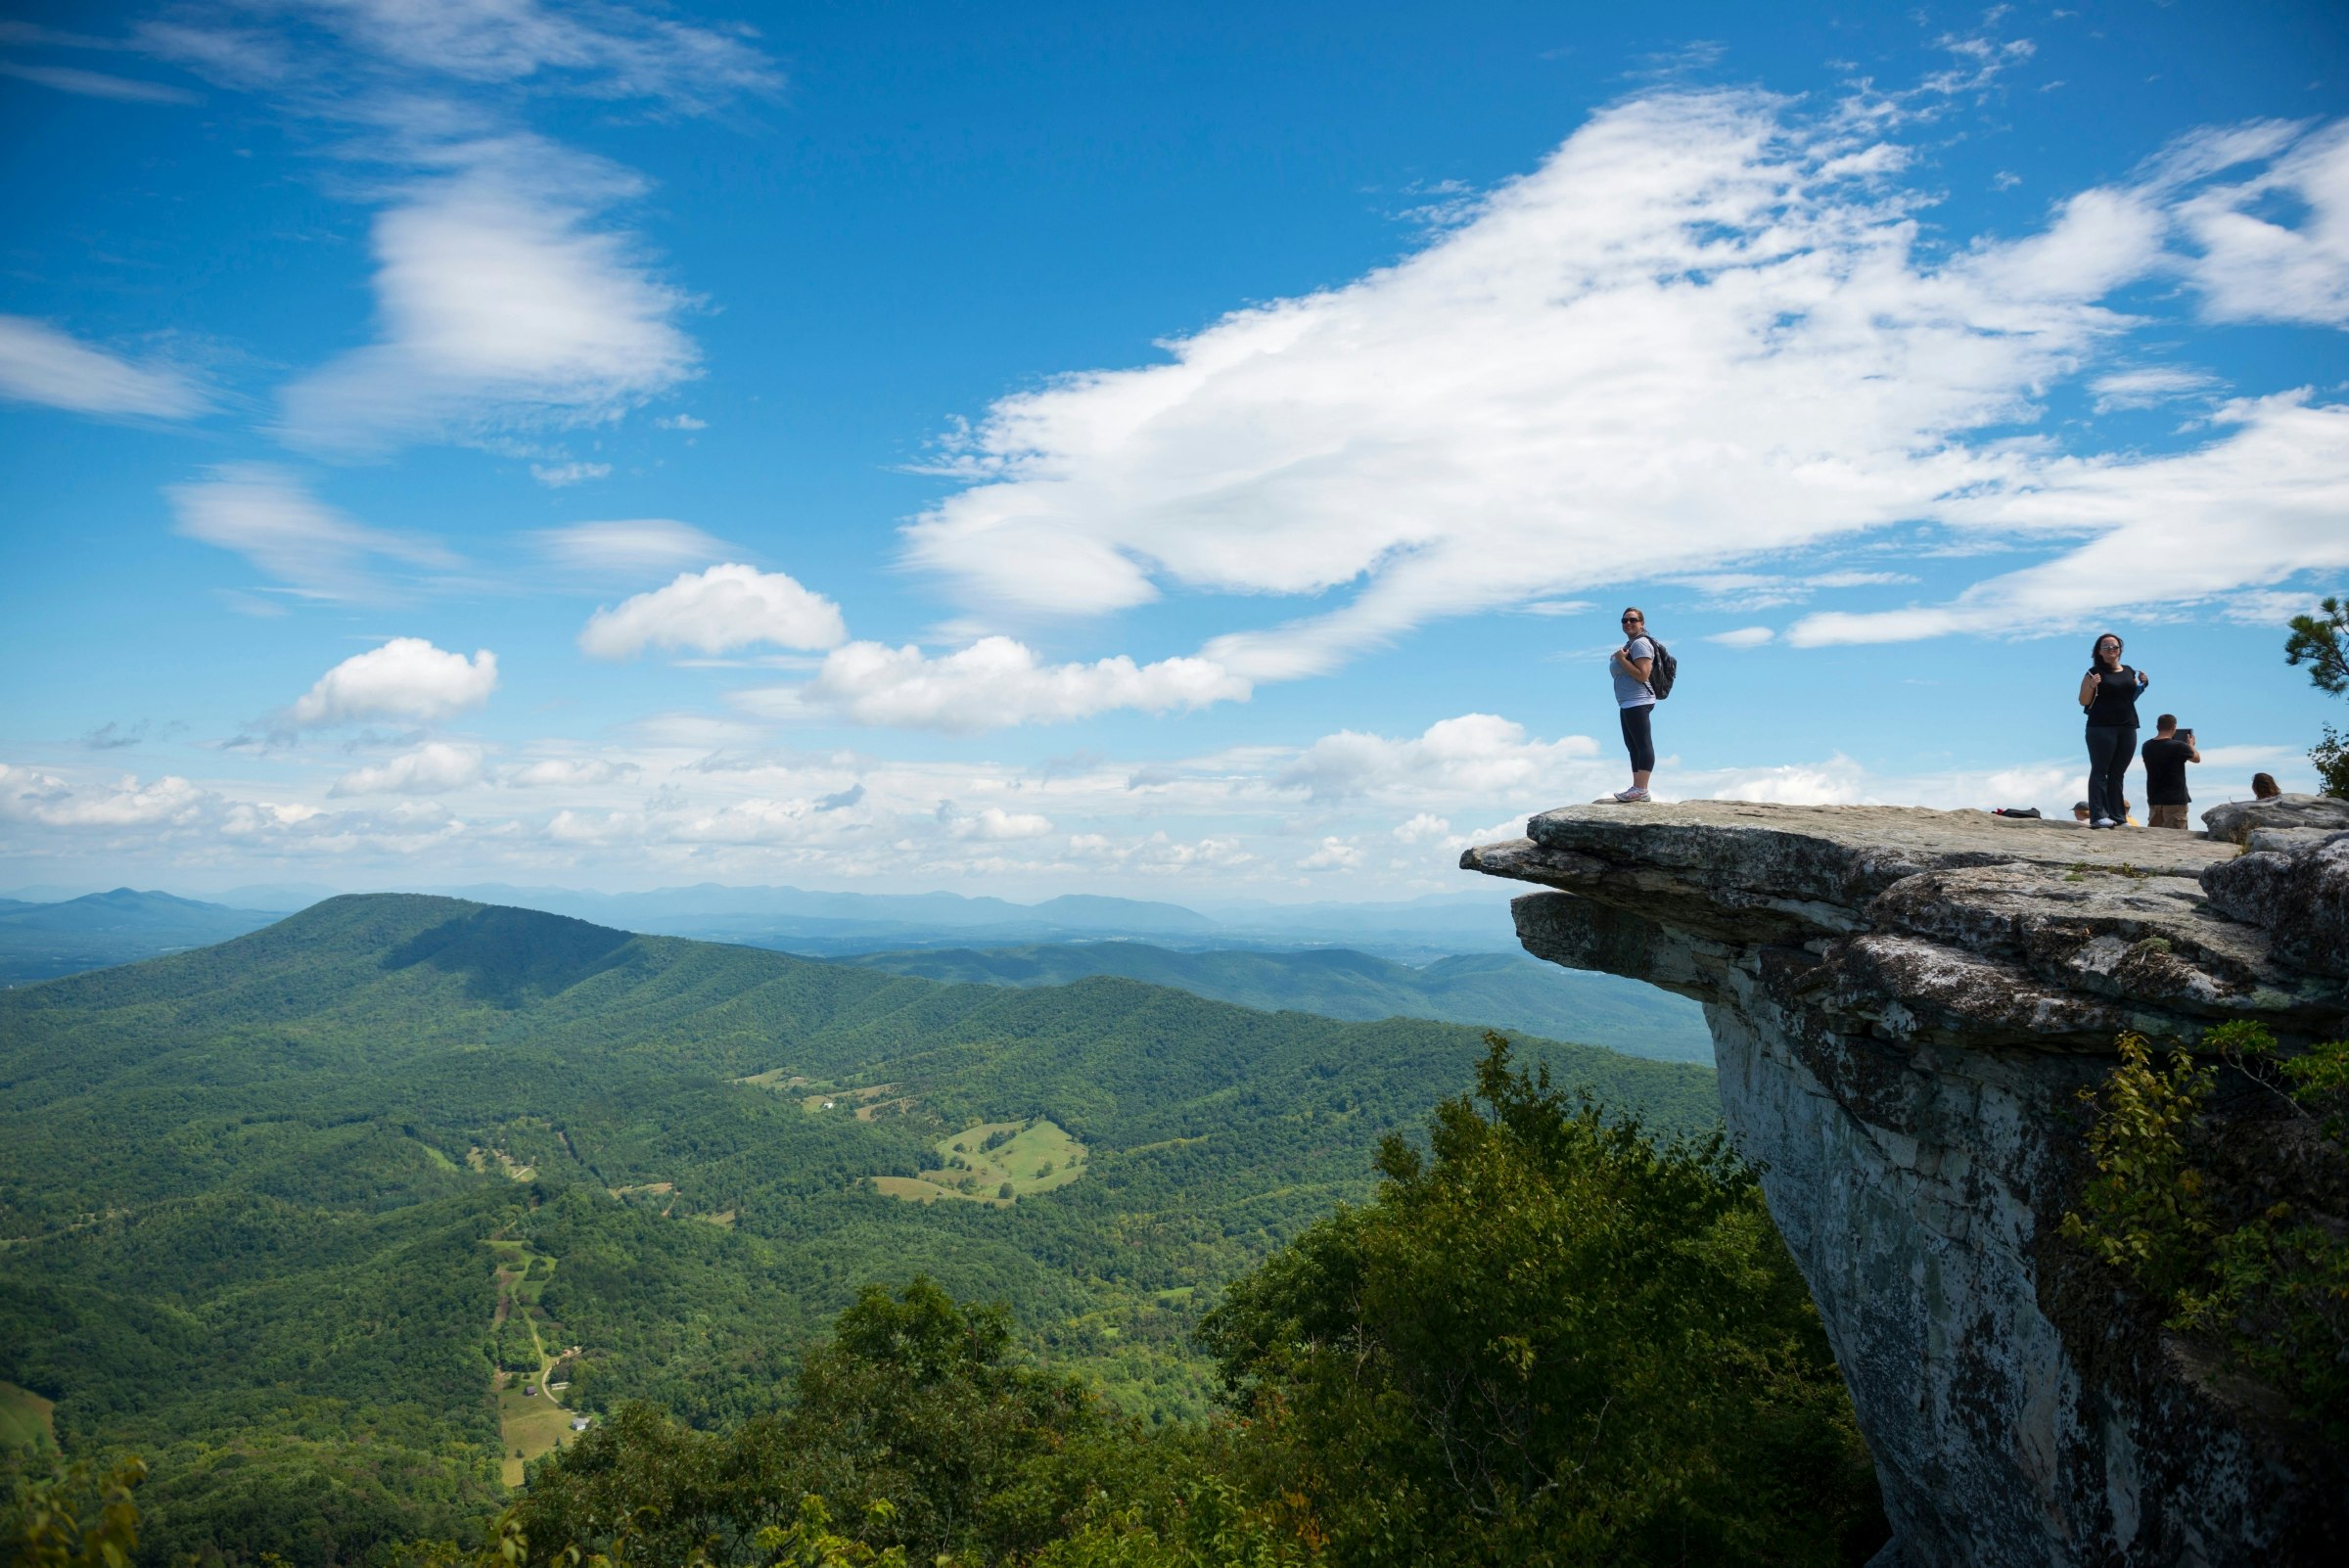 Hikers take in the view of the Appalachian Mountains from McAfee Knob on Catawba Mountain, Virginia 